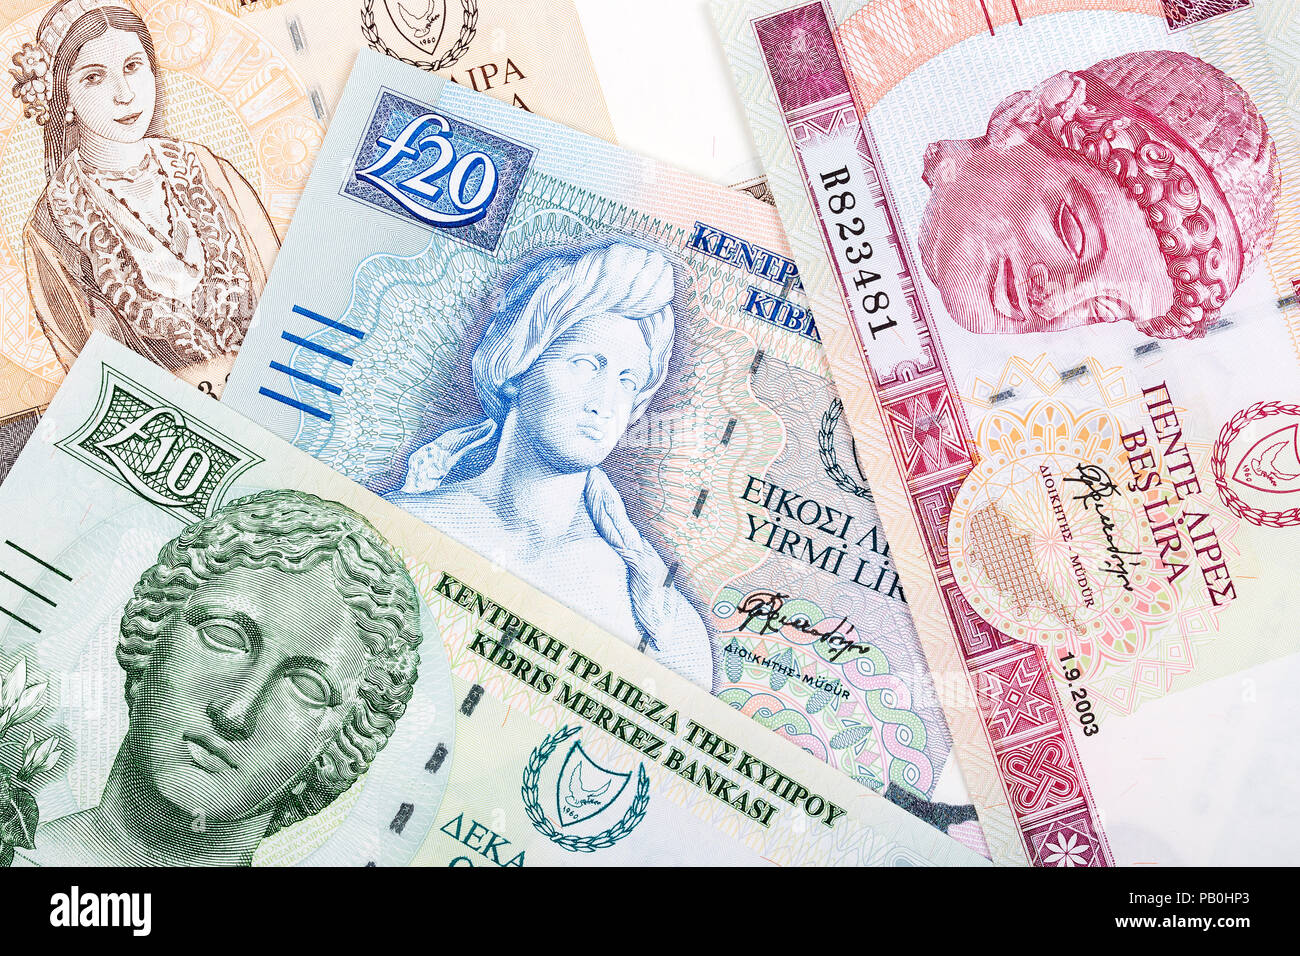 Cypriot Pound, a business background with money from Cyprus Stock Photo